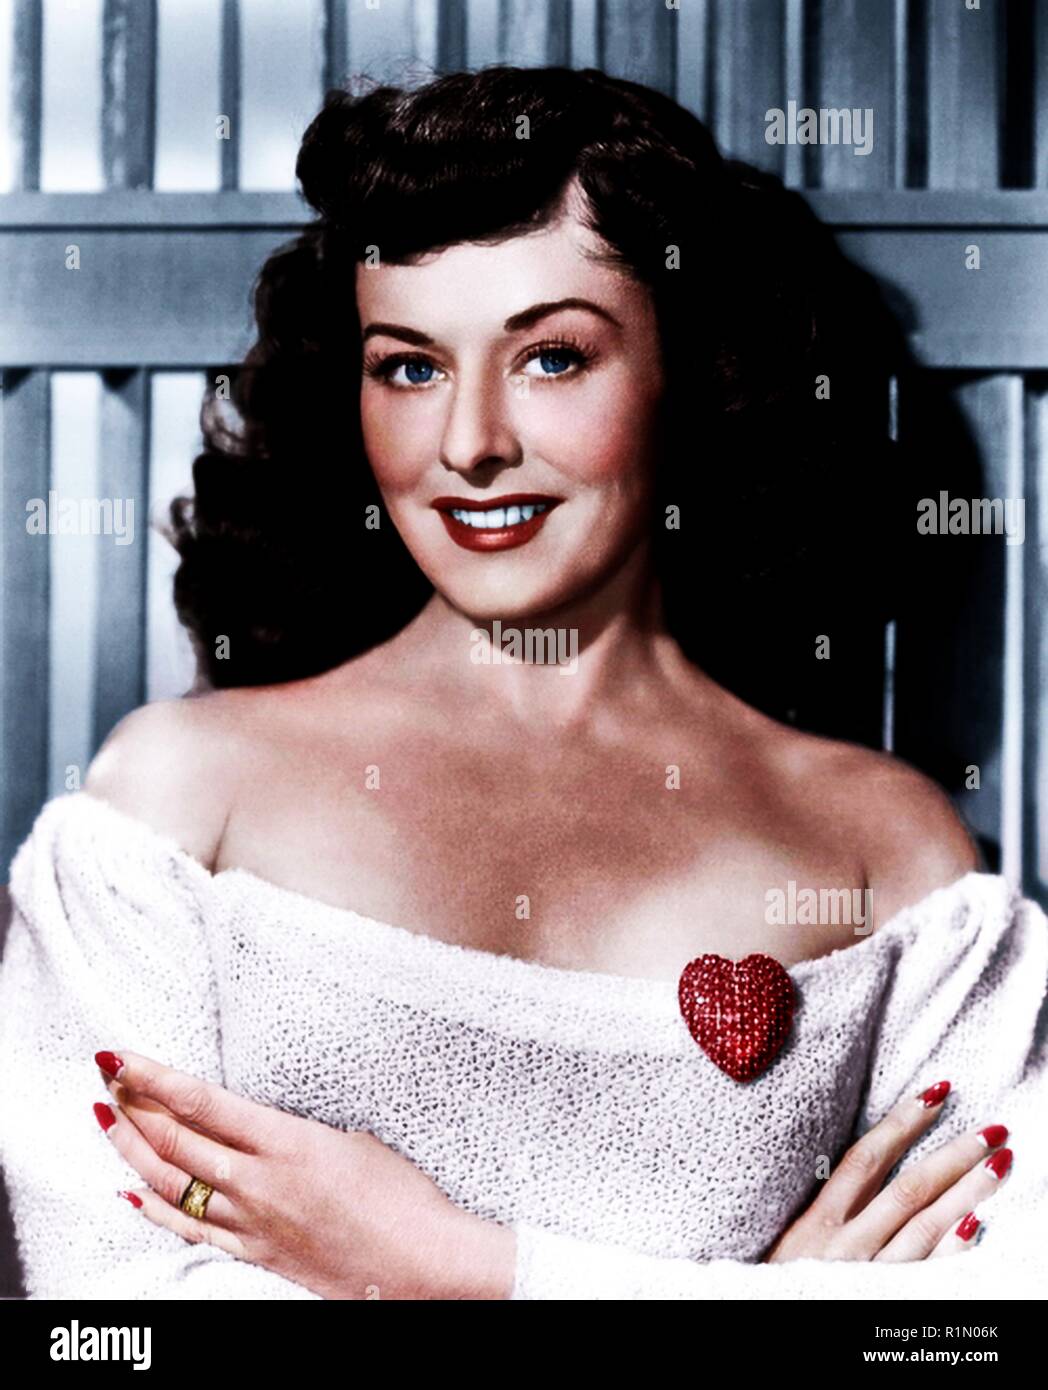 Paulette Goddard (born Marion Levy; June 3, 1910 – April 23, 1990) was an American actress, a child fashion model and a performer in several Broadway productions as a Ziegfeld Girl; she became a major star of Paramount Pictures in the 1940s. Her most notable films were her first major role, as Charlie Chaplin's leading lady in Modern Times, and Chaplin's subsequent film The Great Dictator. She was nominated for an Academy Award for Best Supporting Actress for her performance in So Proudly We Hail! (1943). Her husbands included Chaplin, Burgess Meredith, and Erich Maria Remarque. Hollywood Phot Stock Photo